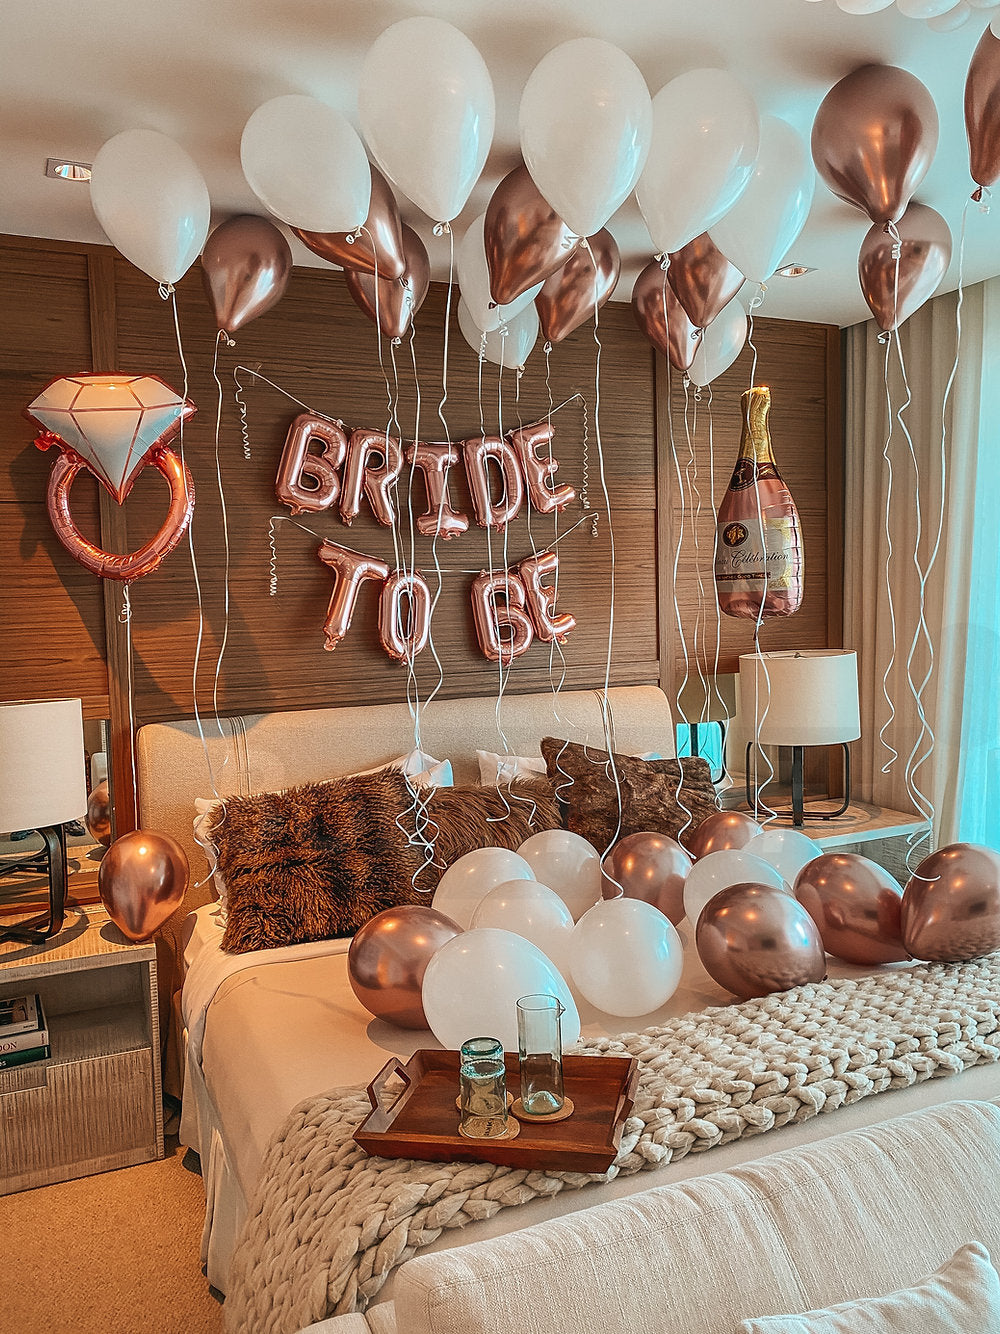 Bride to Be Decoration At Home, Bachelorette Party Decoration, Bridal  Shower Ideas #bridetobe #viral - YouTube